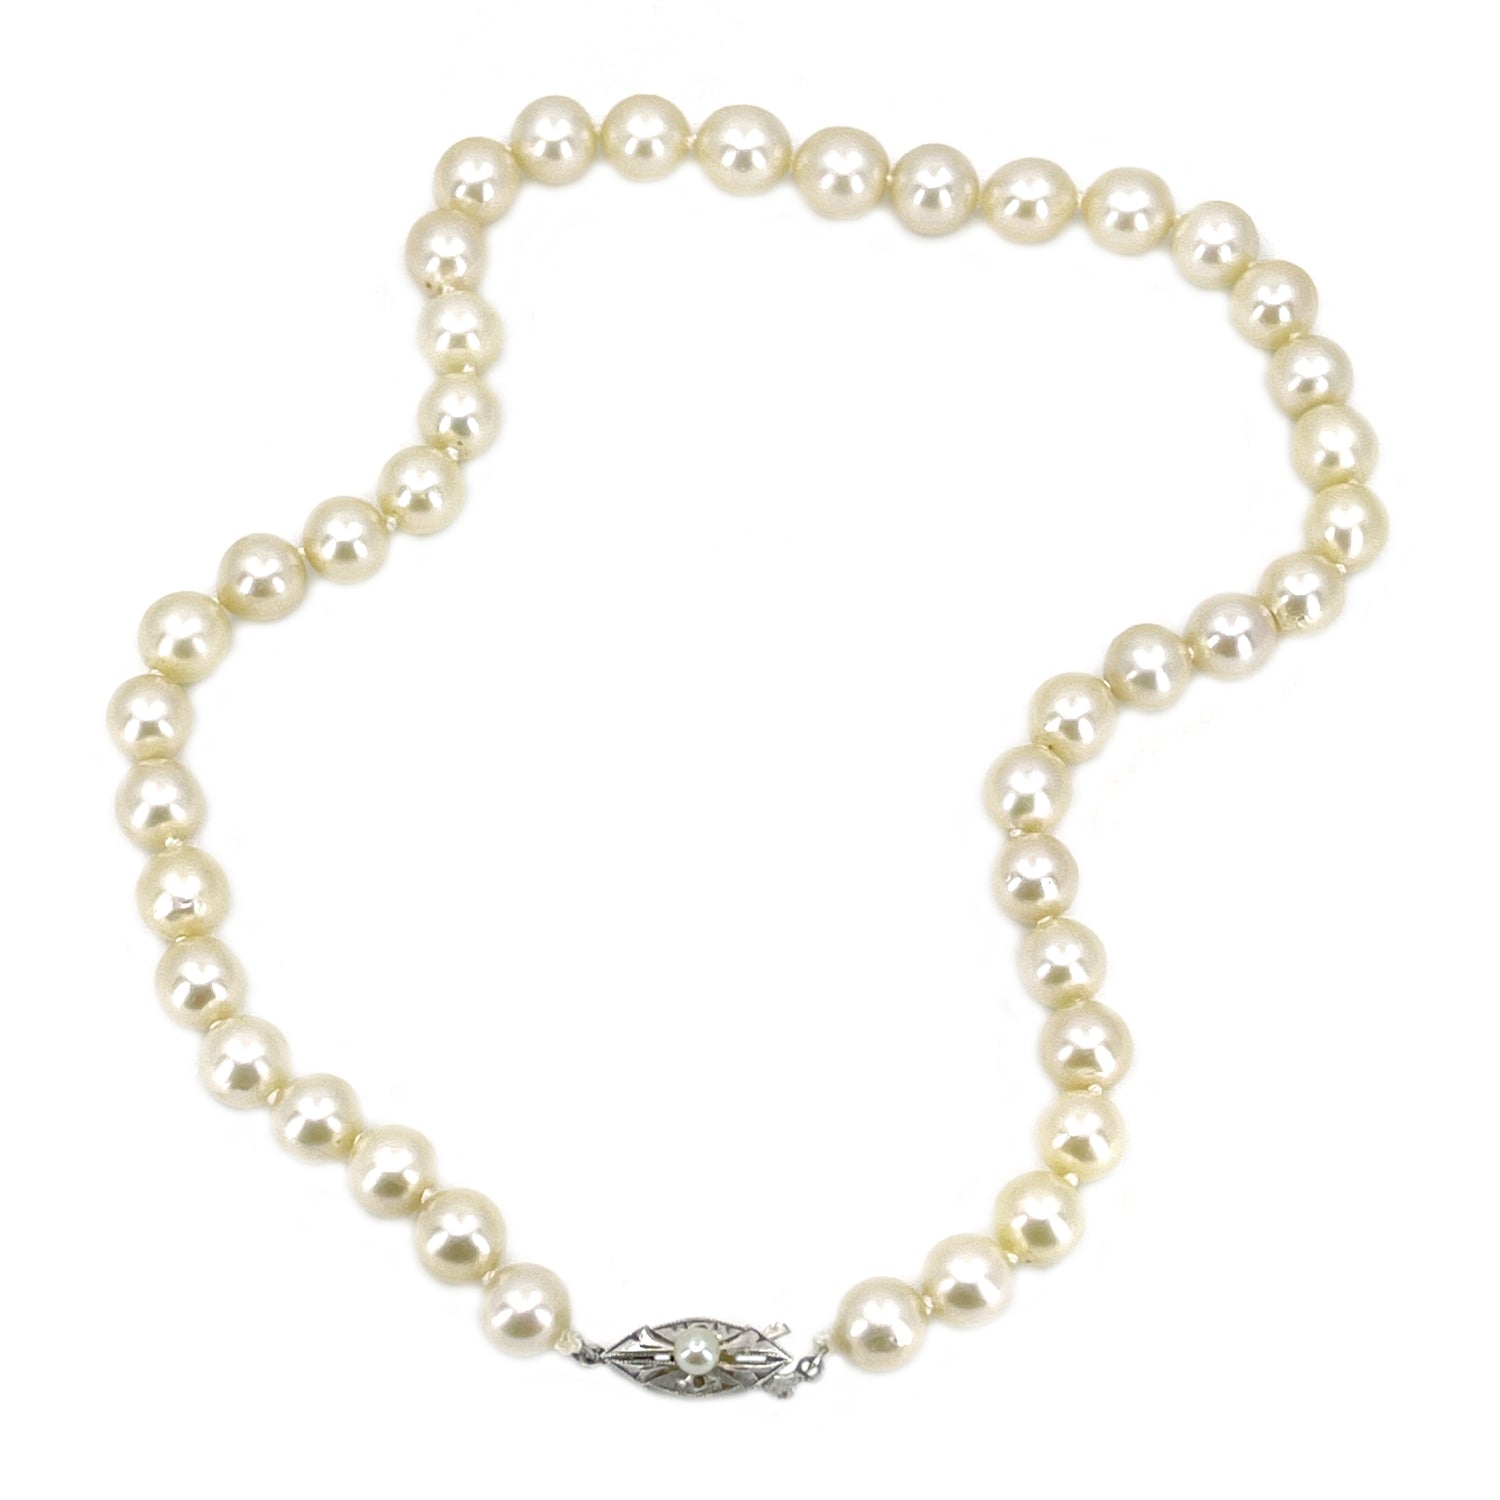 Large 8MM Deco Vintage Japanese Saltwater Cultured Akoya Pearl Necklace Strand - Sterling Silver 15 Inch